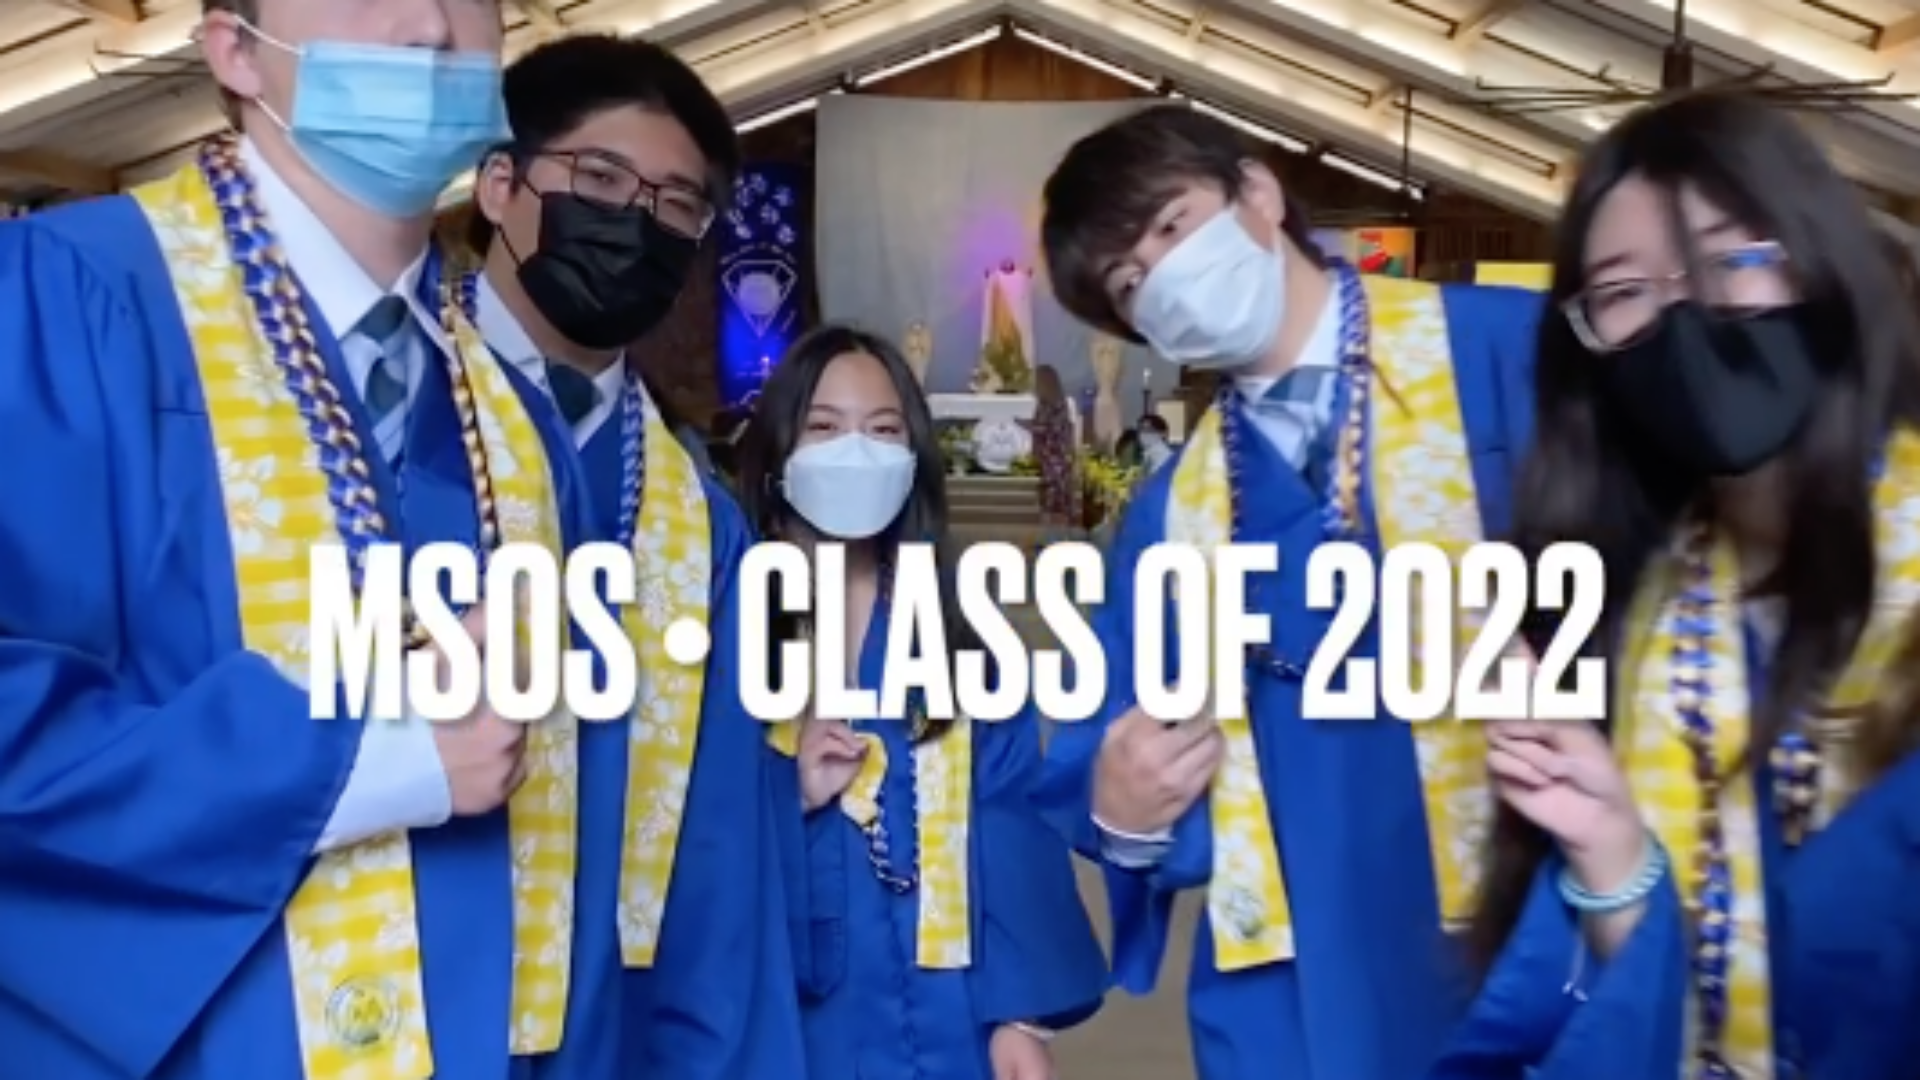 Congratulations to the MSOS Class of 2022